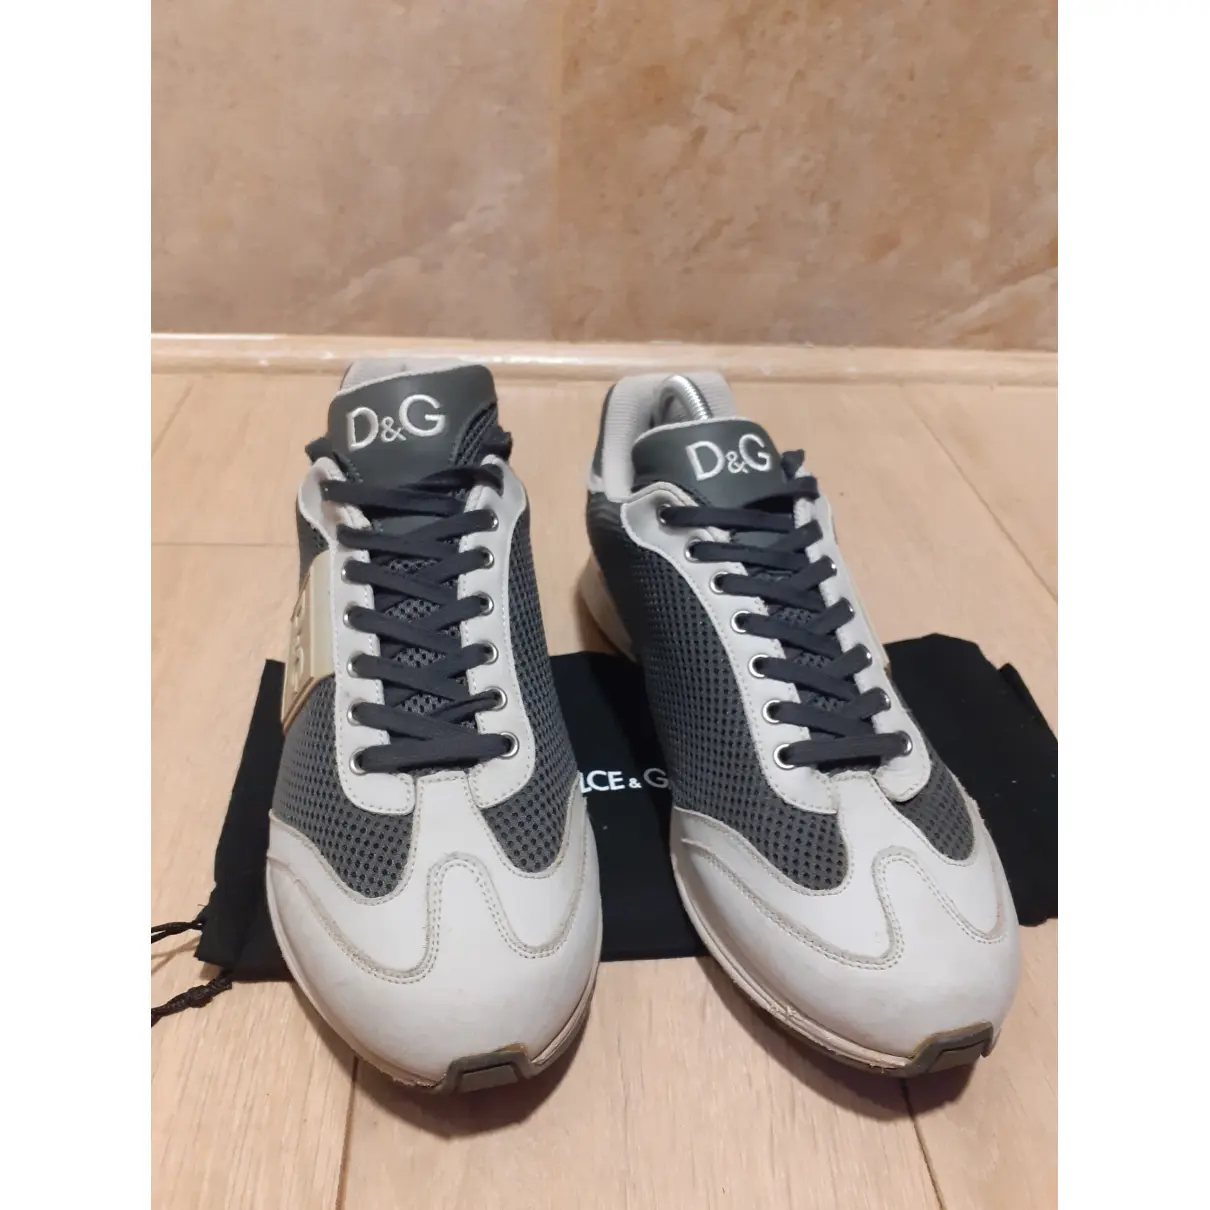 Buy D&G Cloth low trainers online